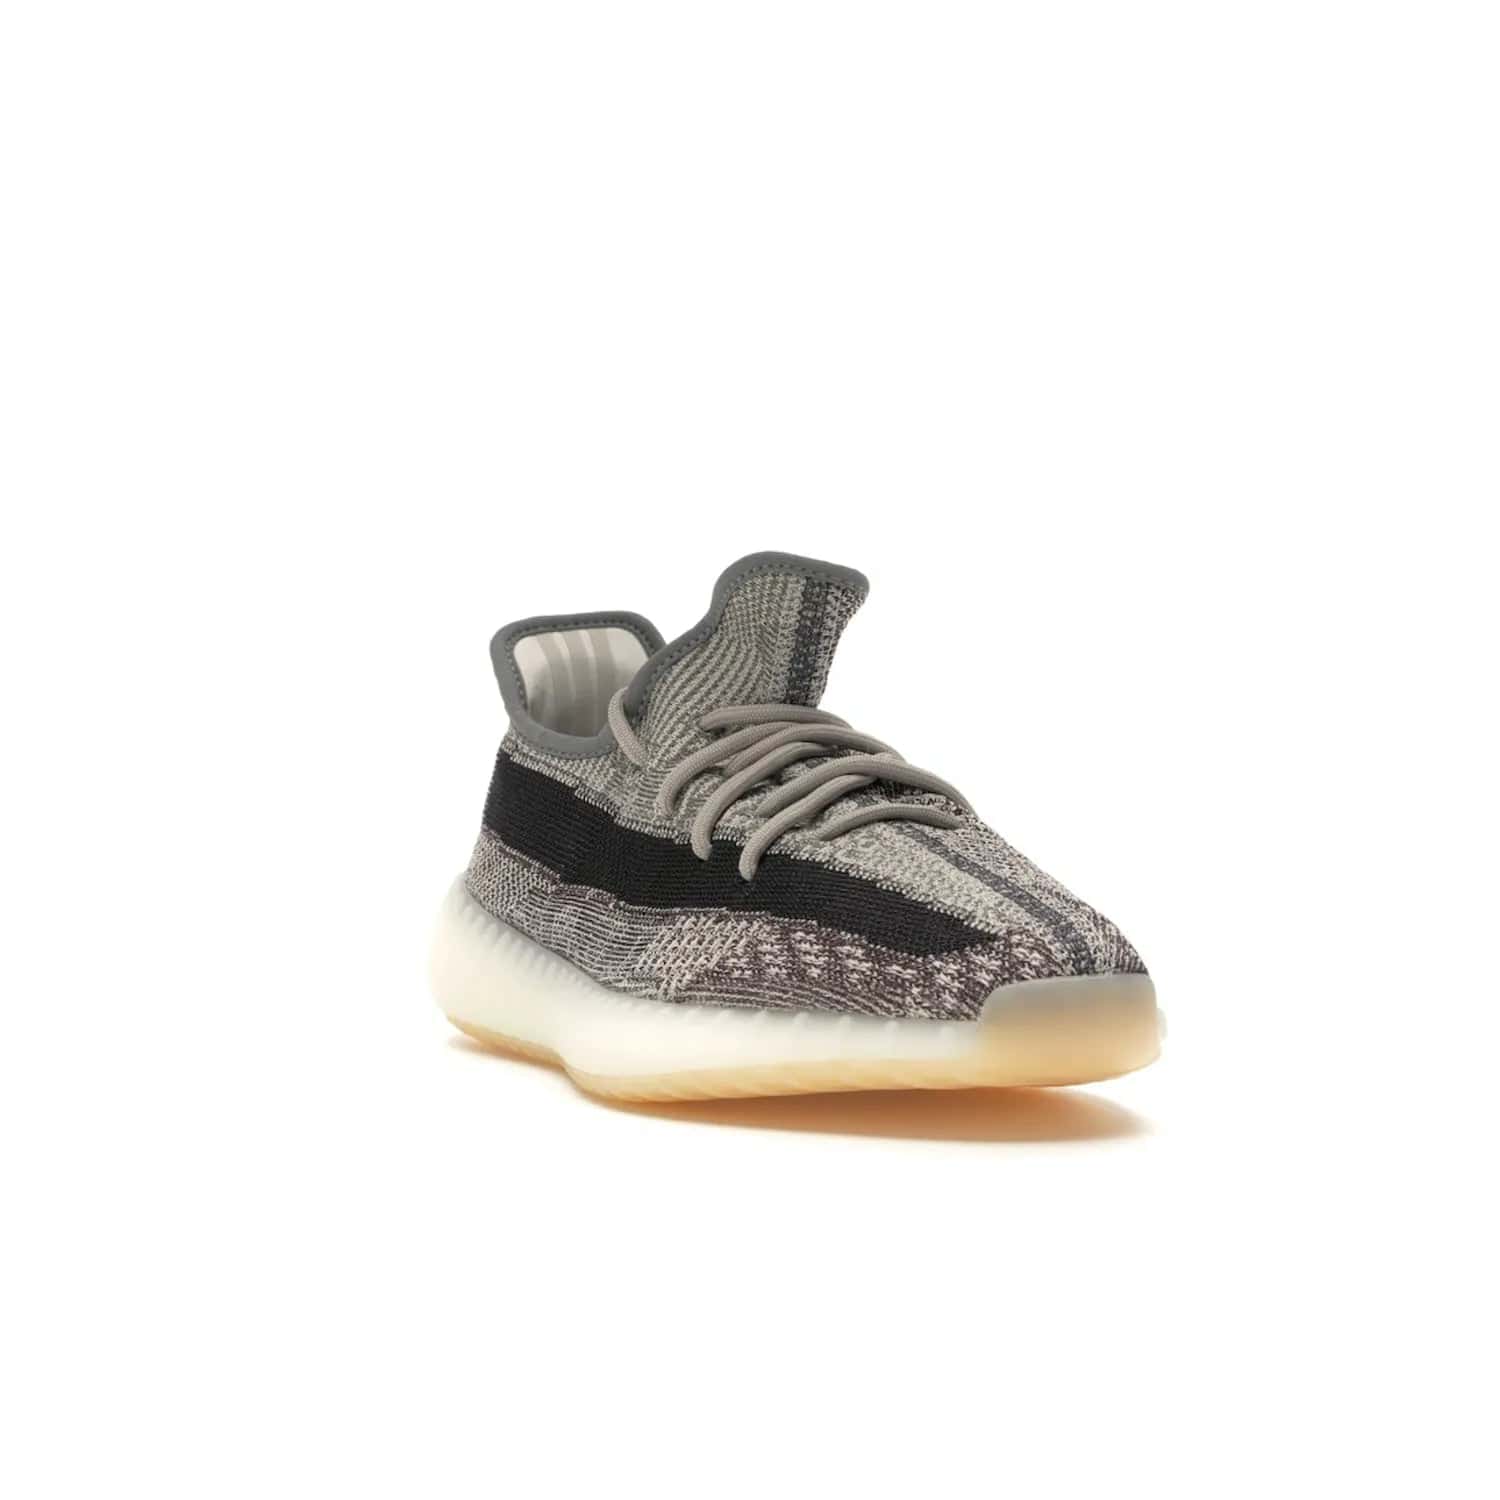 adidas Yeezy Boost 350 V2 Zyon - Image 7 - Only at www.BallersClubKickz.com - Step up your style game with the adidas Yeezy Boost 350 V2 Zyon. This sleek sneaker features a Primeknit upper, dark side stripe, translucent Boost sole, and creamy white interior providing style and comfort. Get them now!